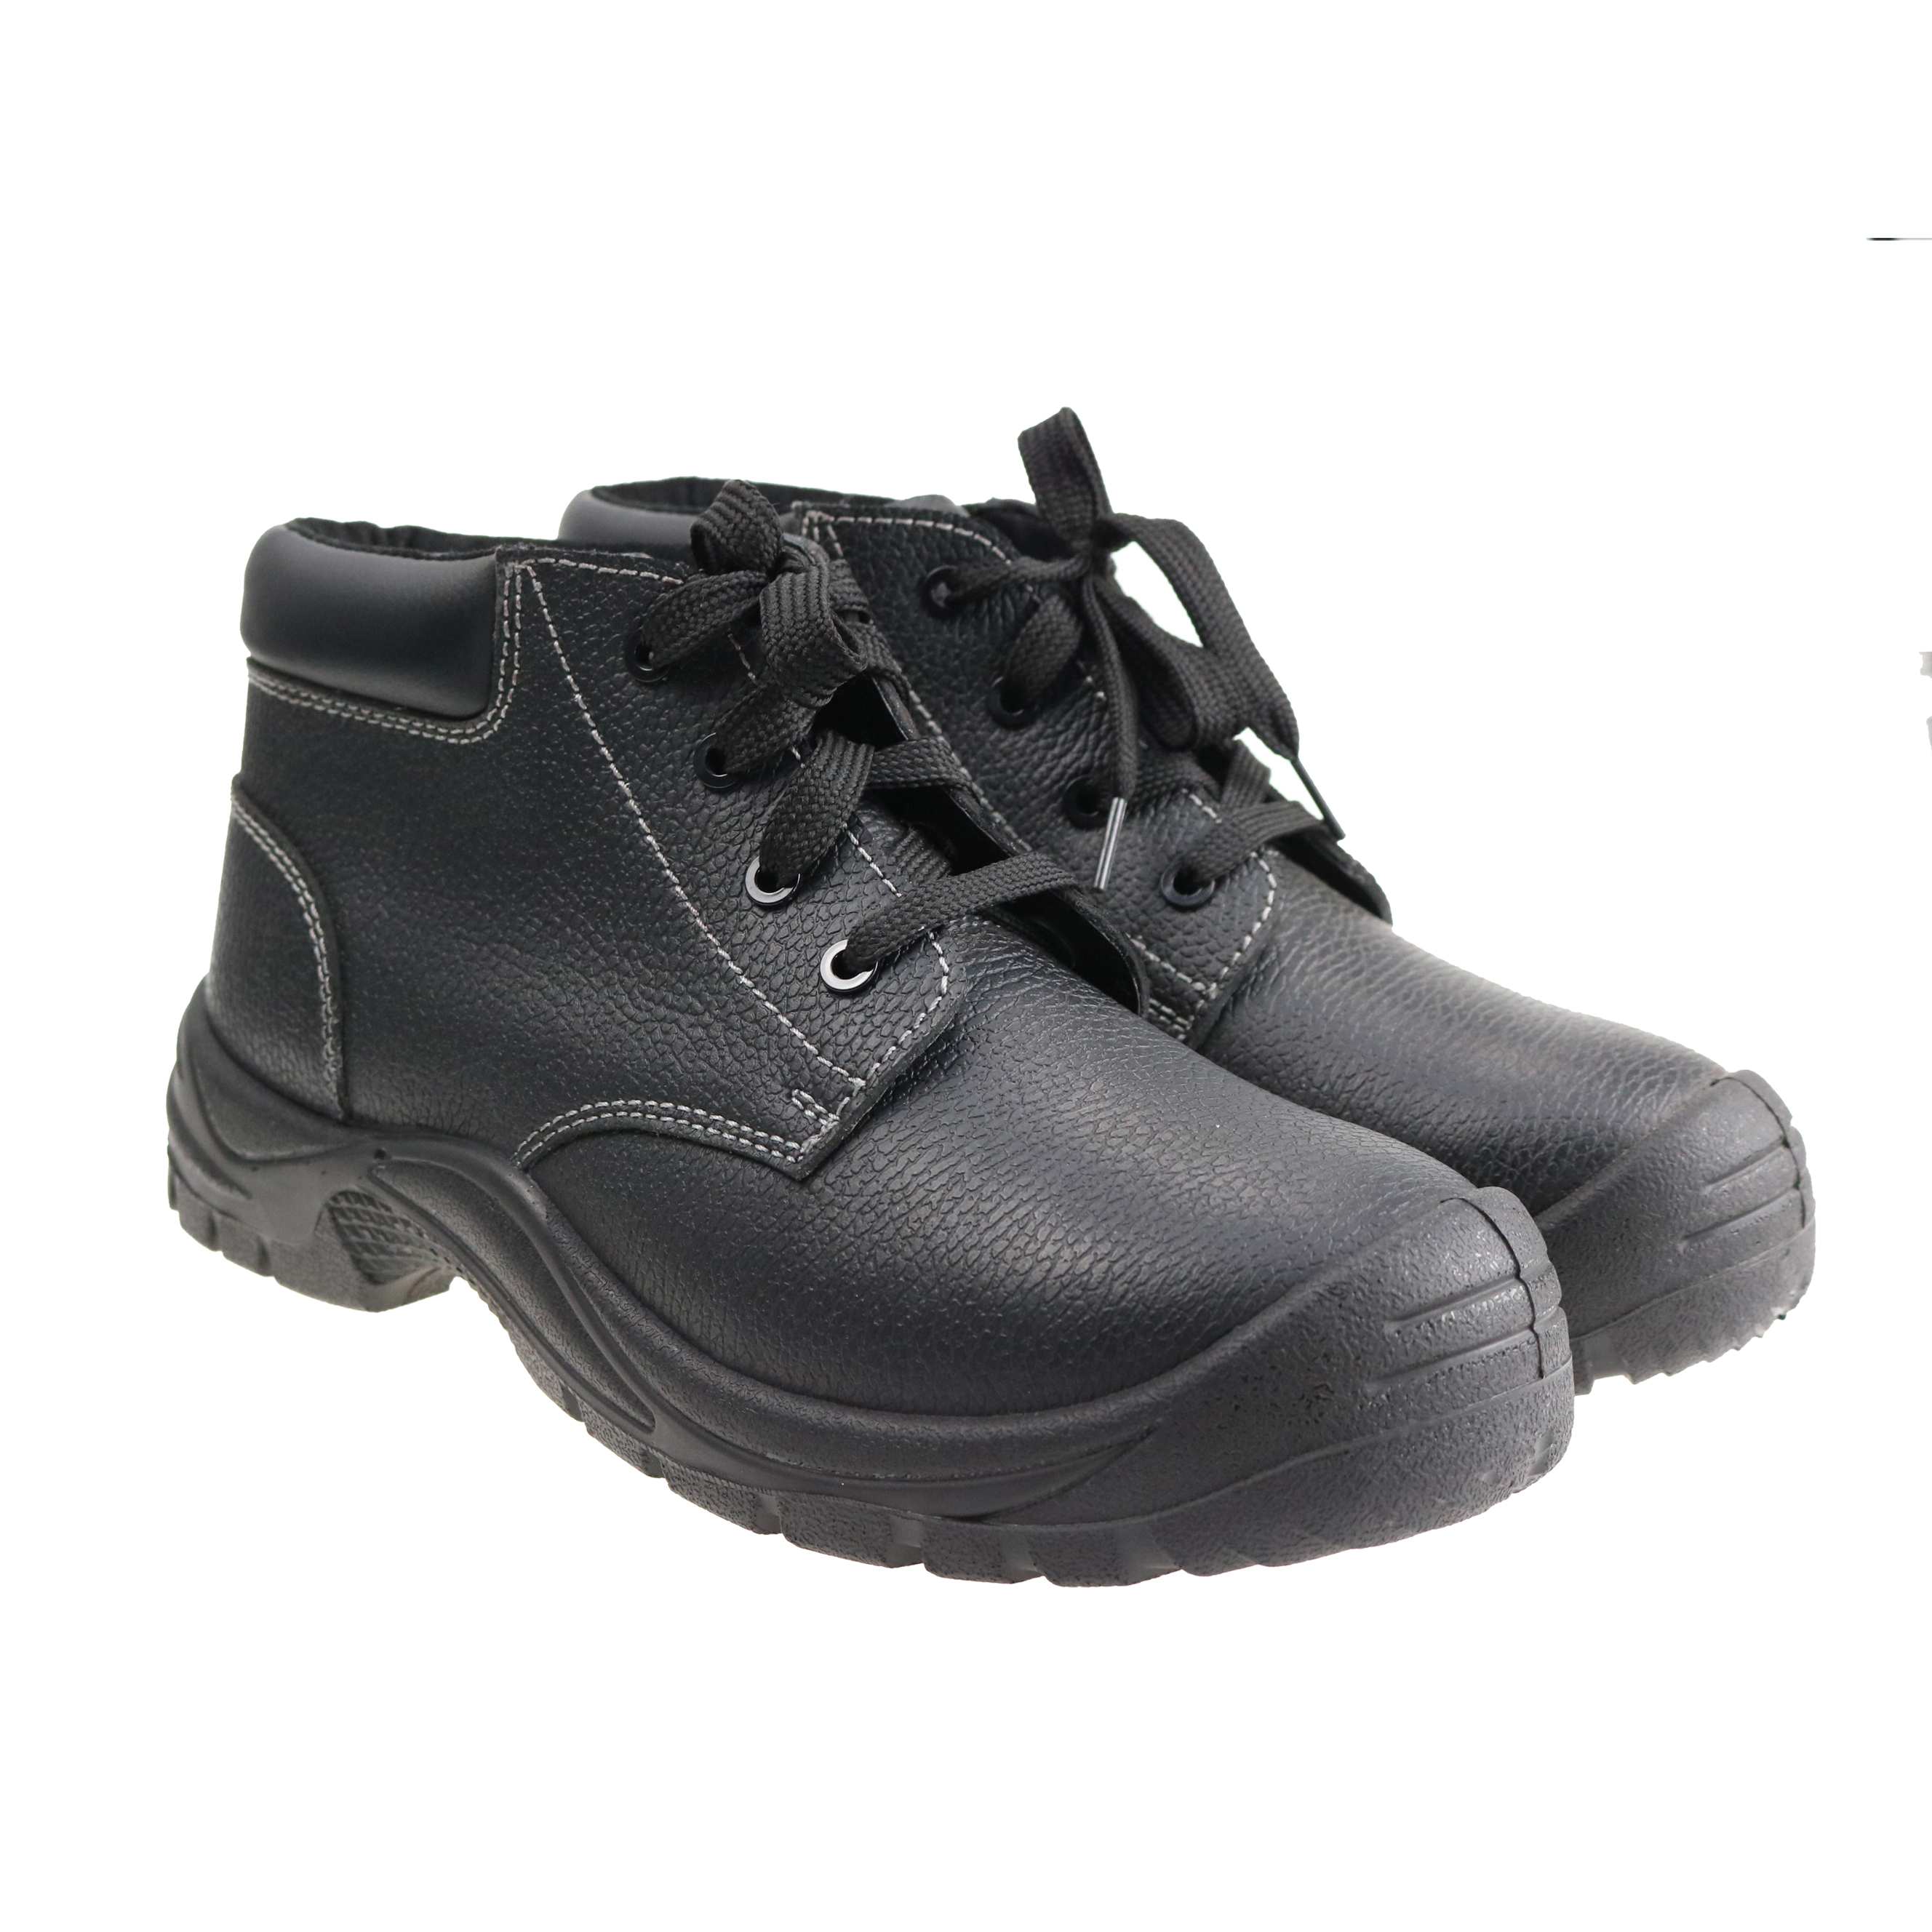 Black genuine leather safety shoes with steel toe ,anti static construction water proof safety shoes